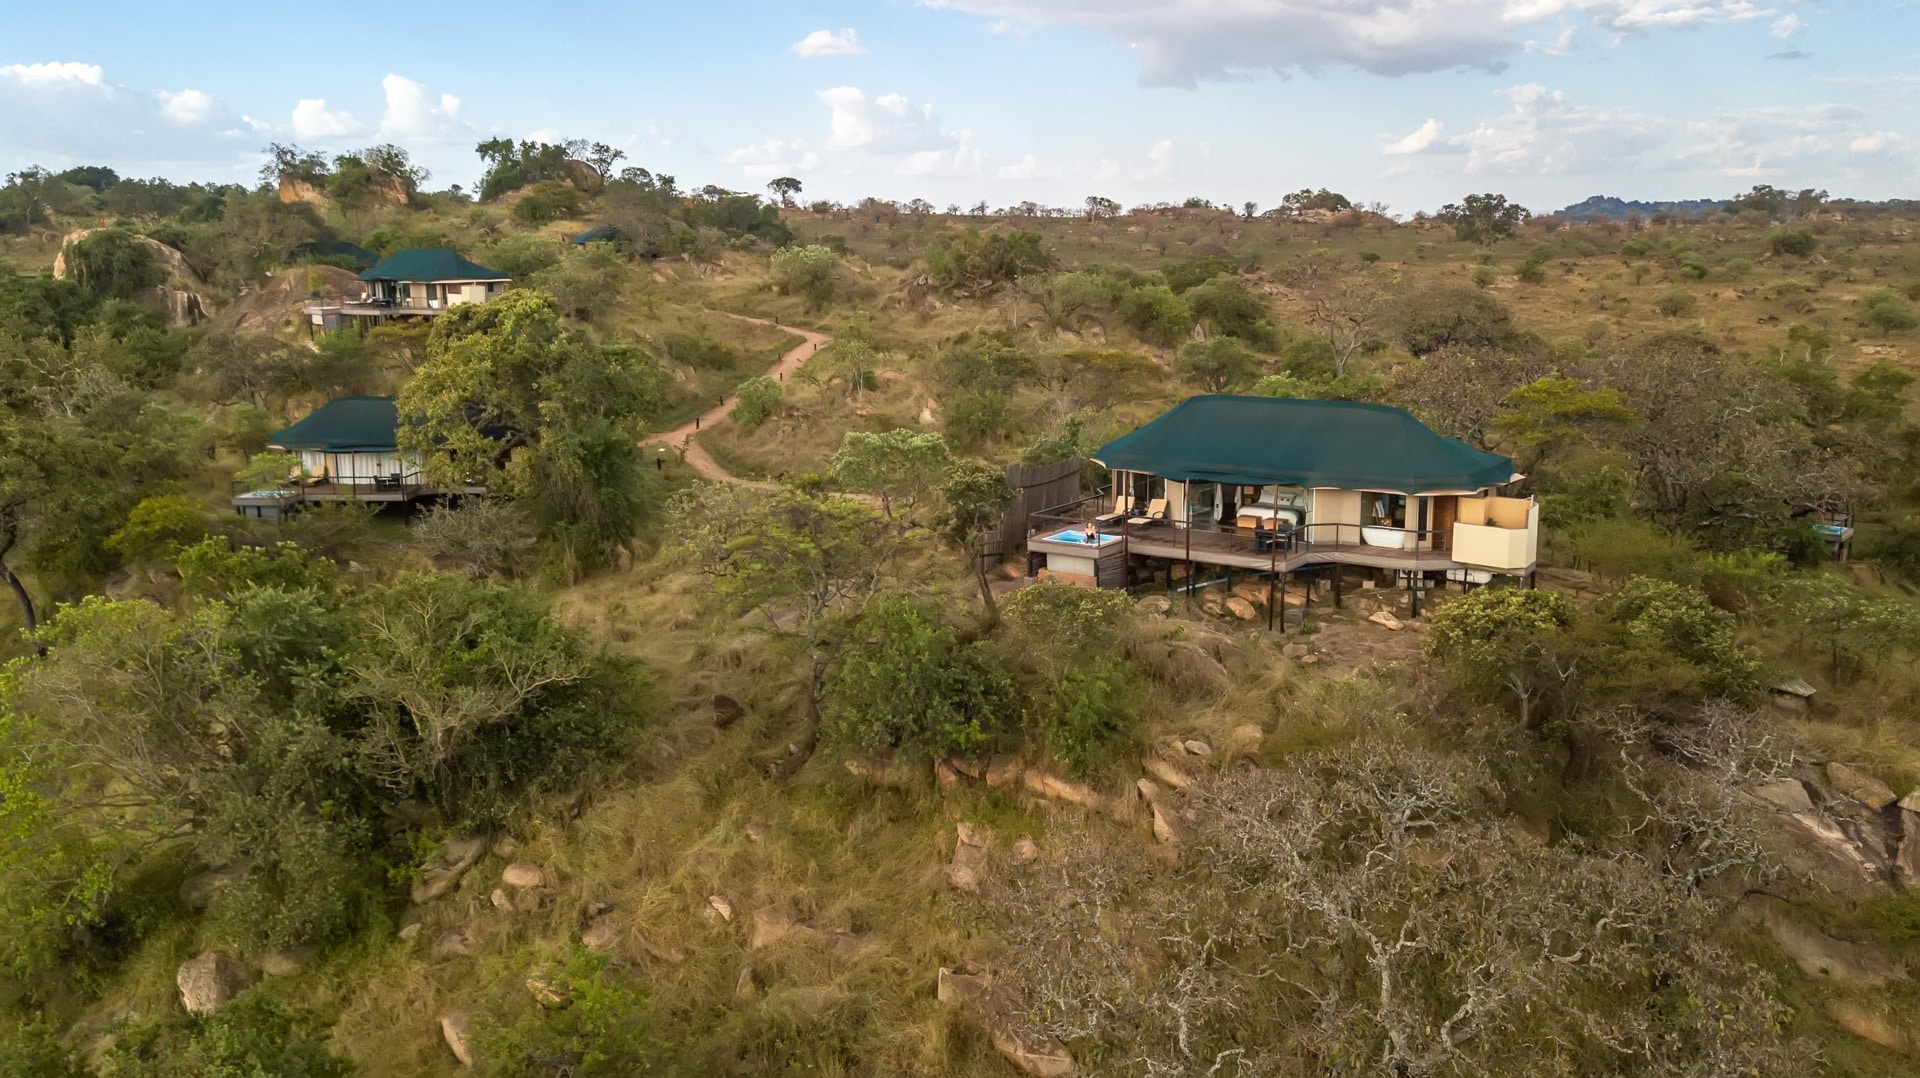 Tented suites on the hill at Lemala Kuria Hills.